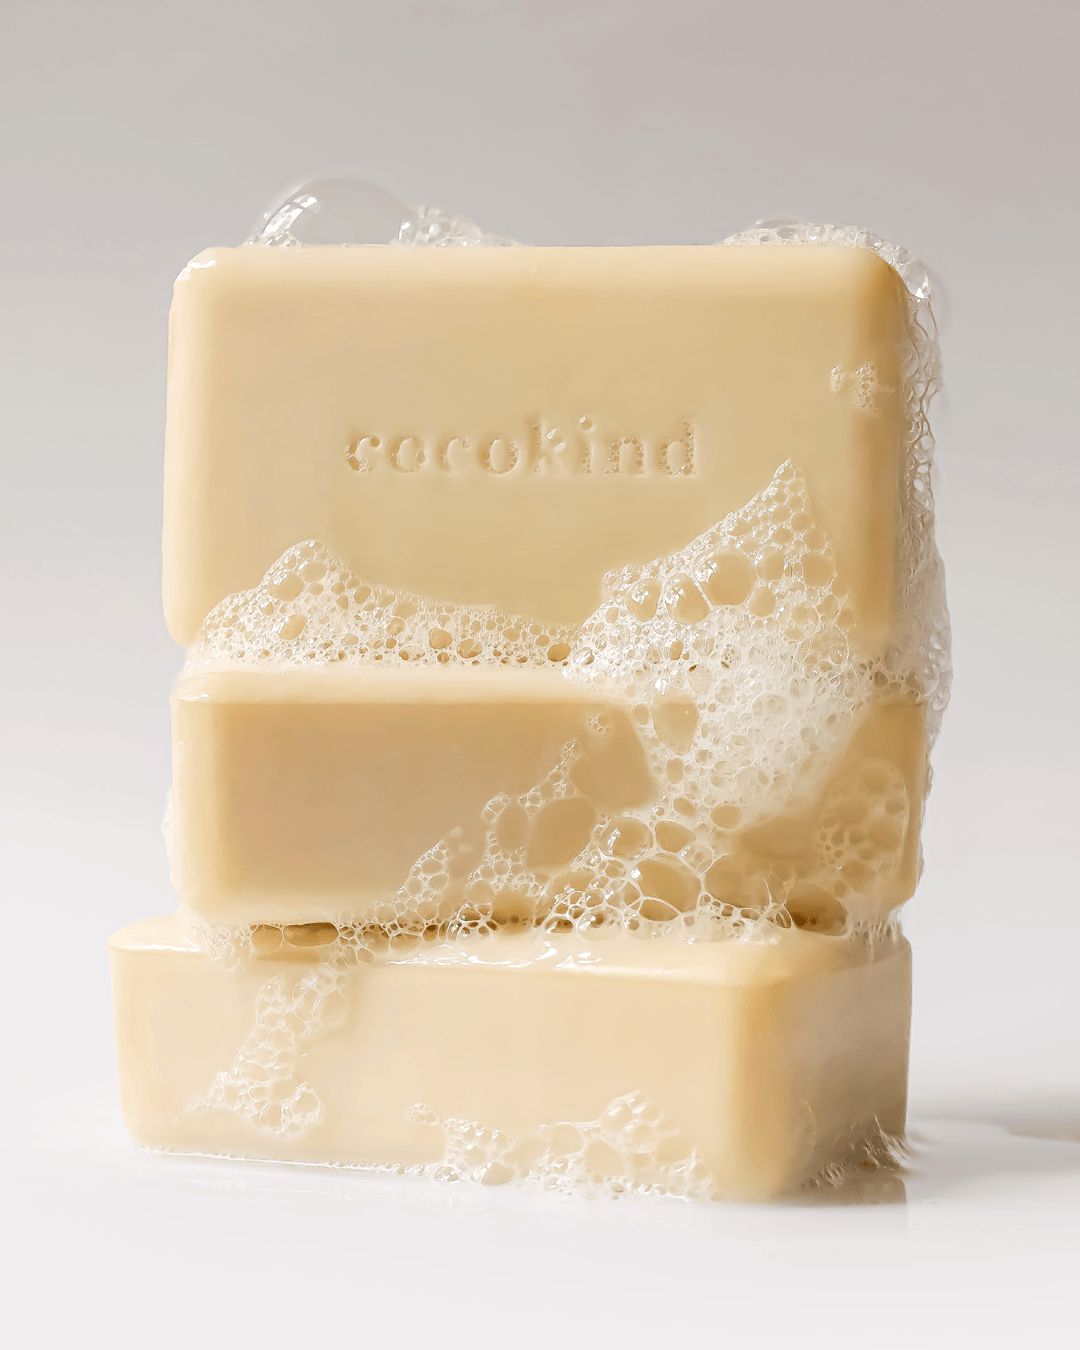 body cleansing bar - cocokind